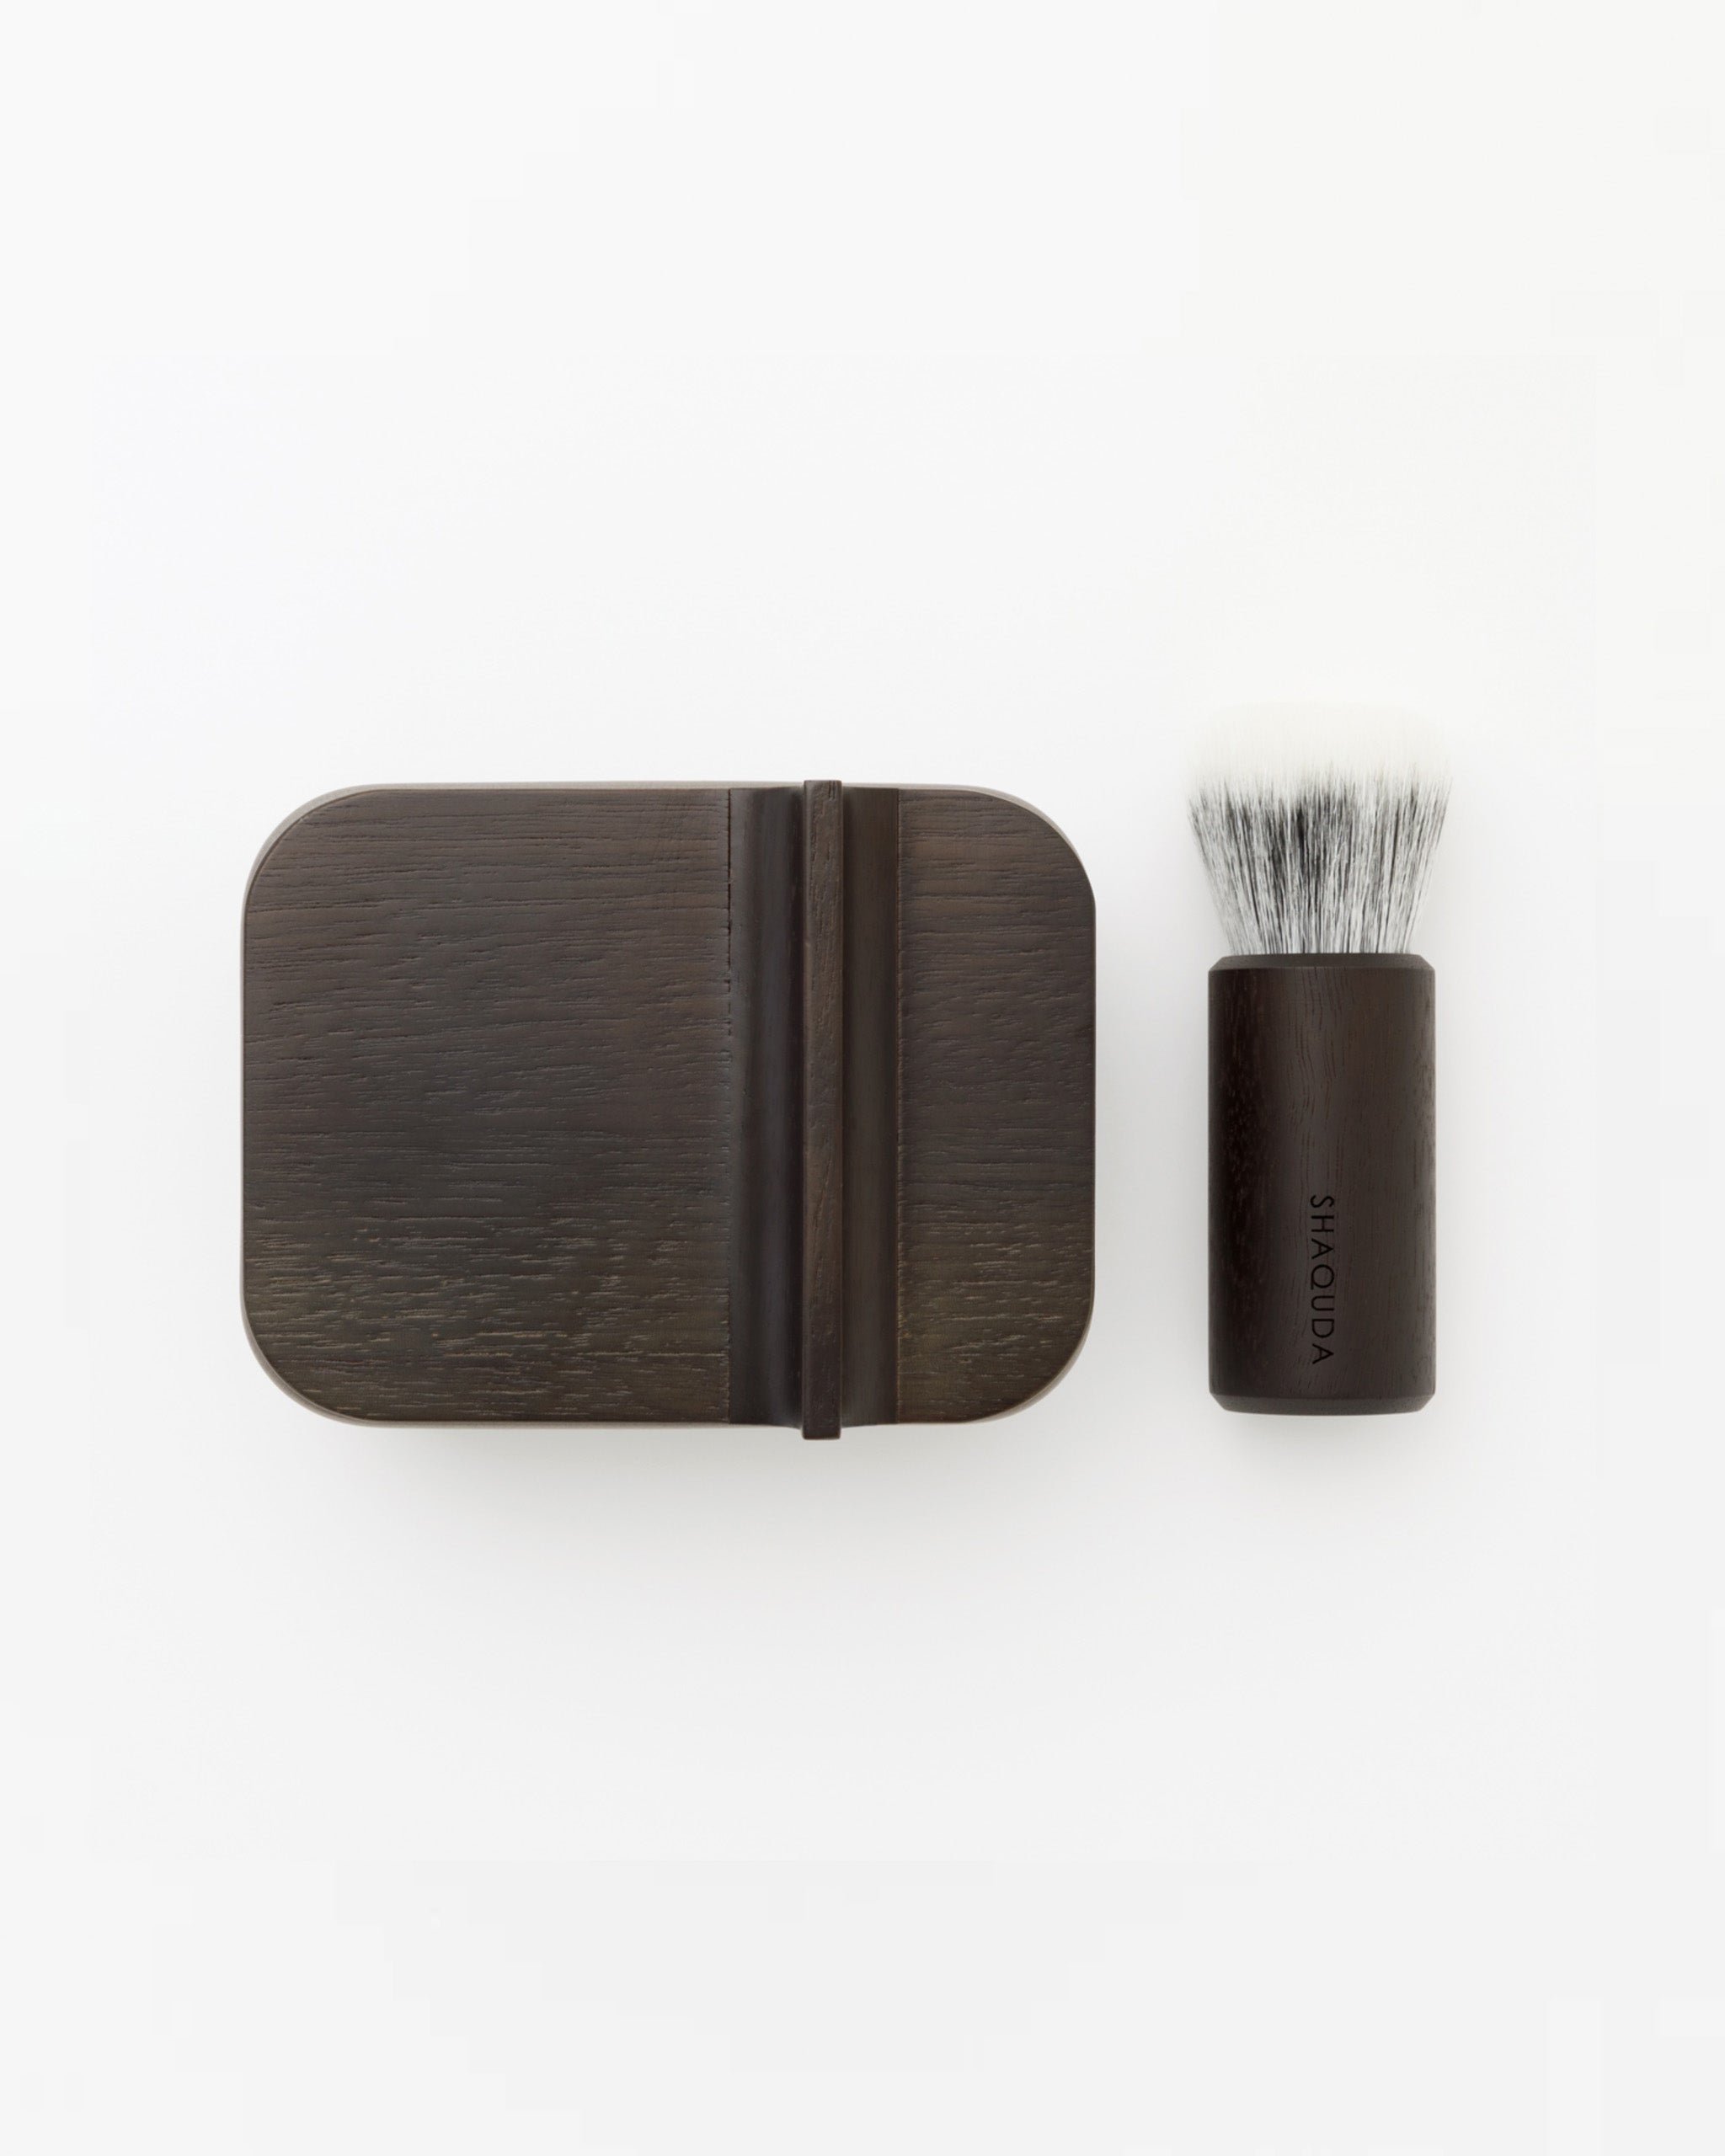 Image of soft Jiva face cleansing and shaving series with porcelain bowl next to walnut, boar bristle, and goat hair brush by Shaquda against white-gray background.